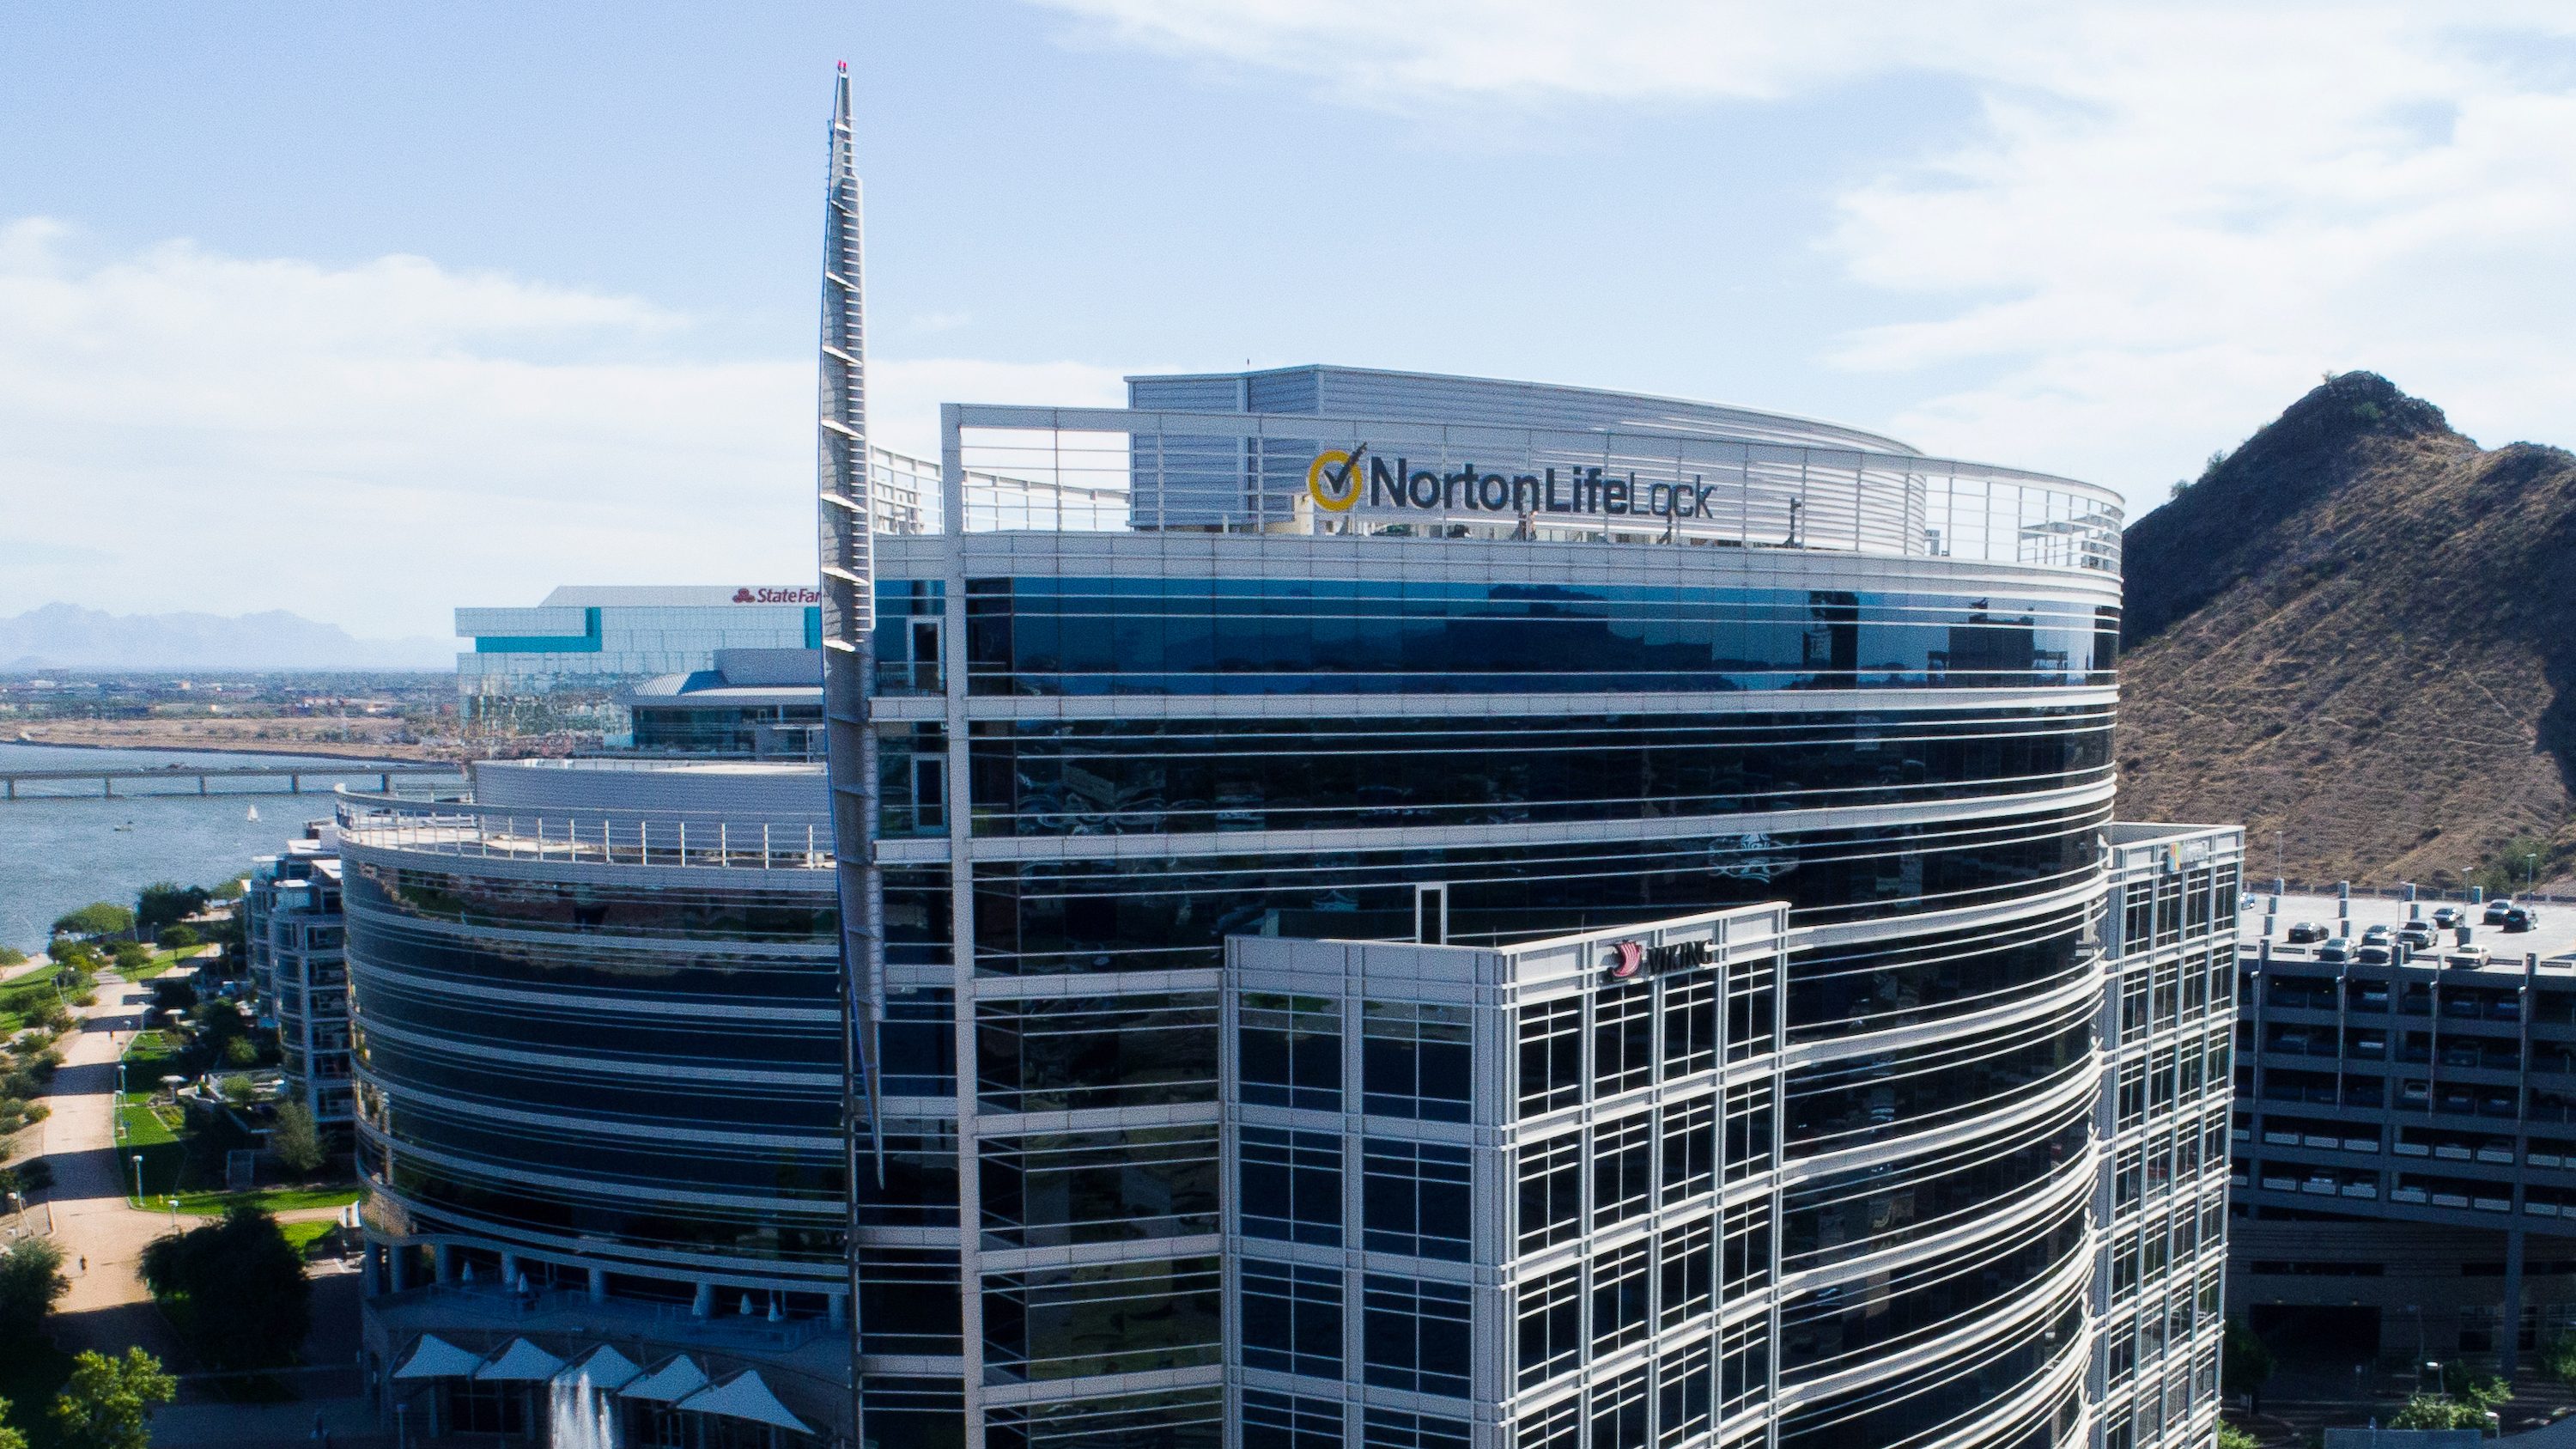 Cybersecurity giants NortonLifeLock and Avast merge in 8.1B deal